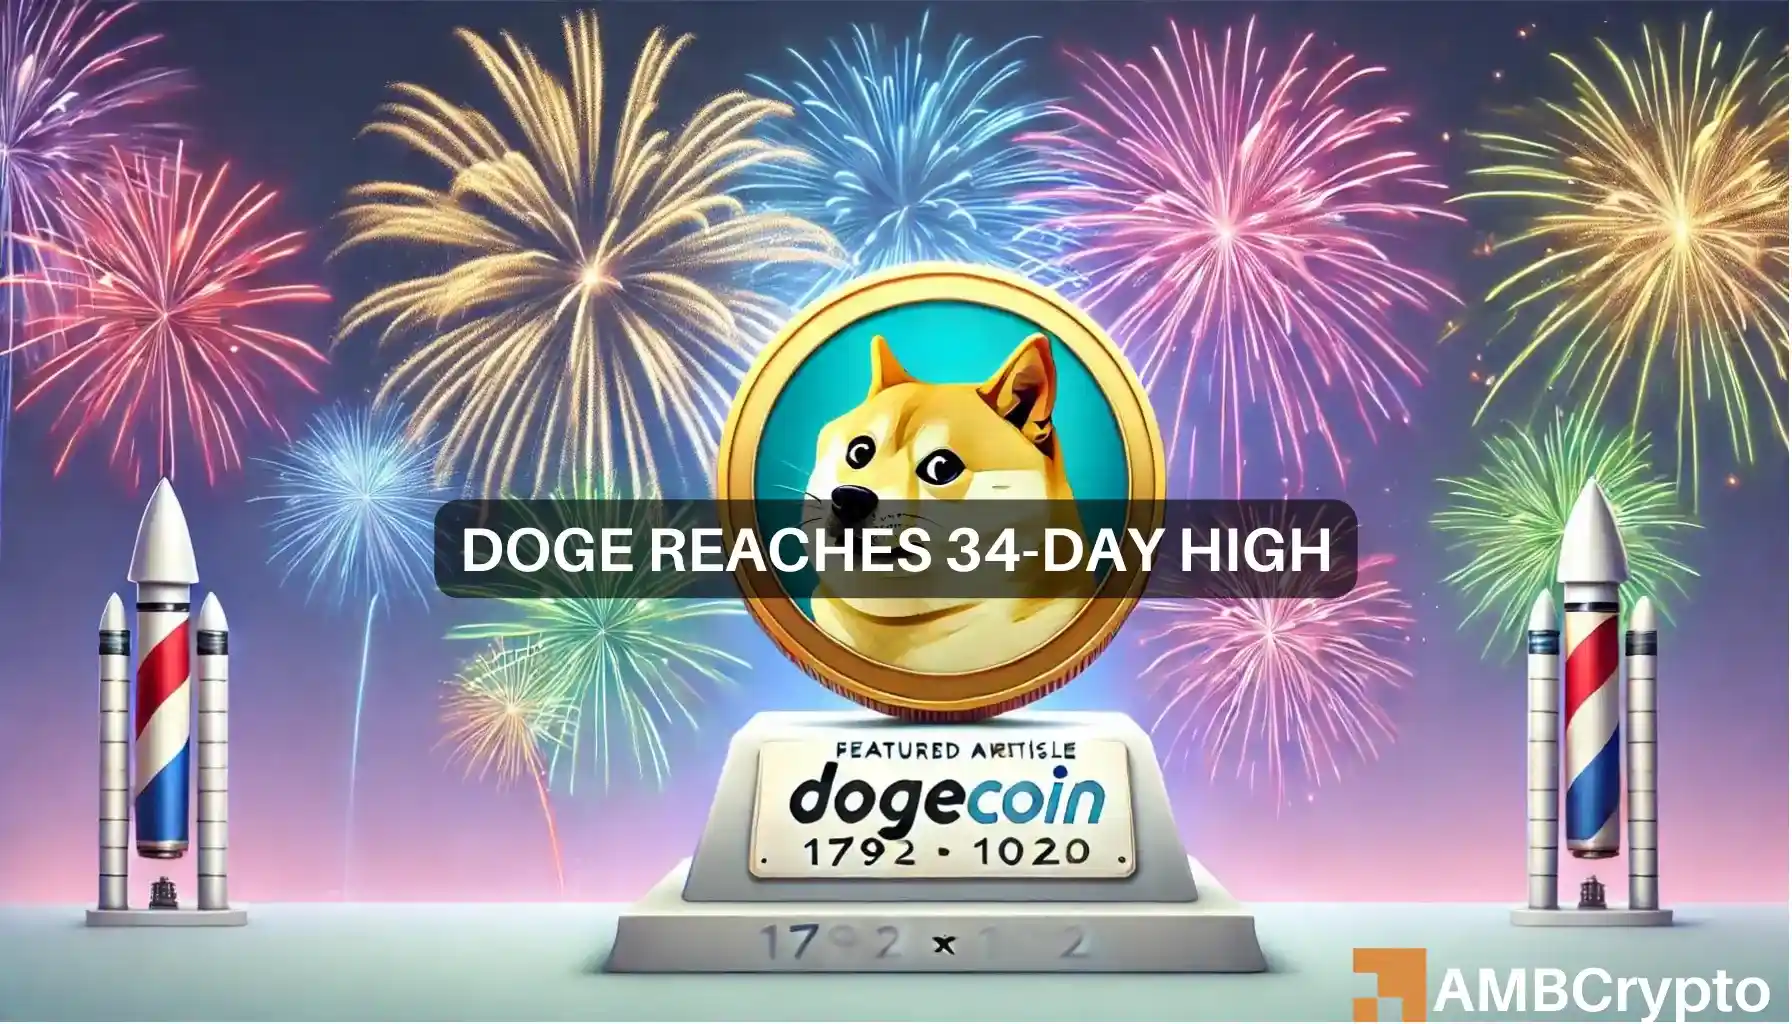 Dogecoin hits 34-day high: Can DOGE maintain its climb?